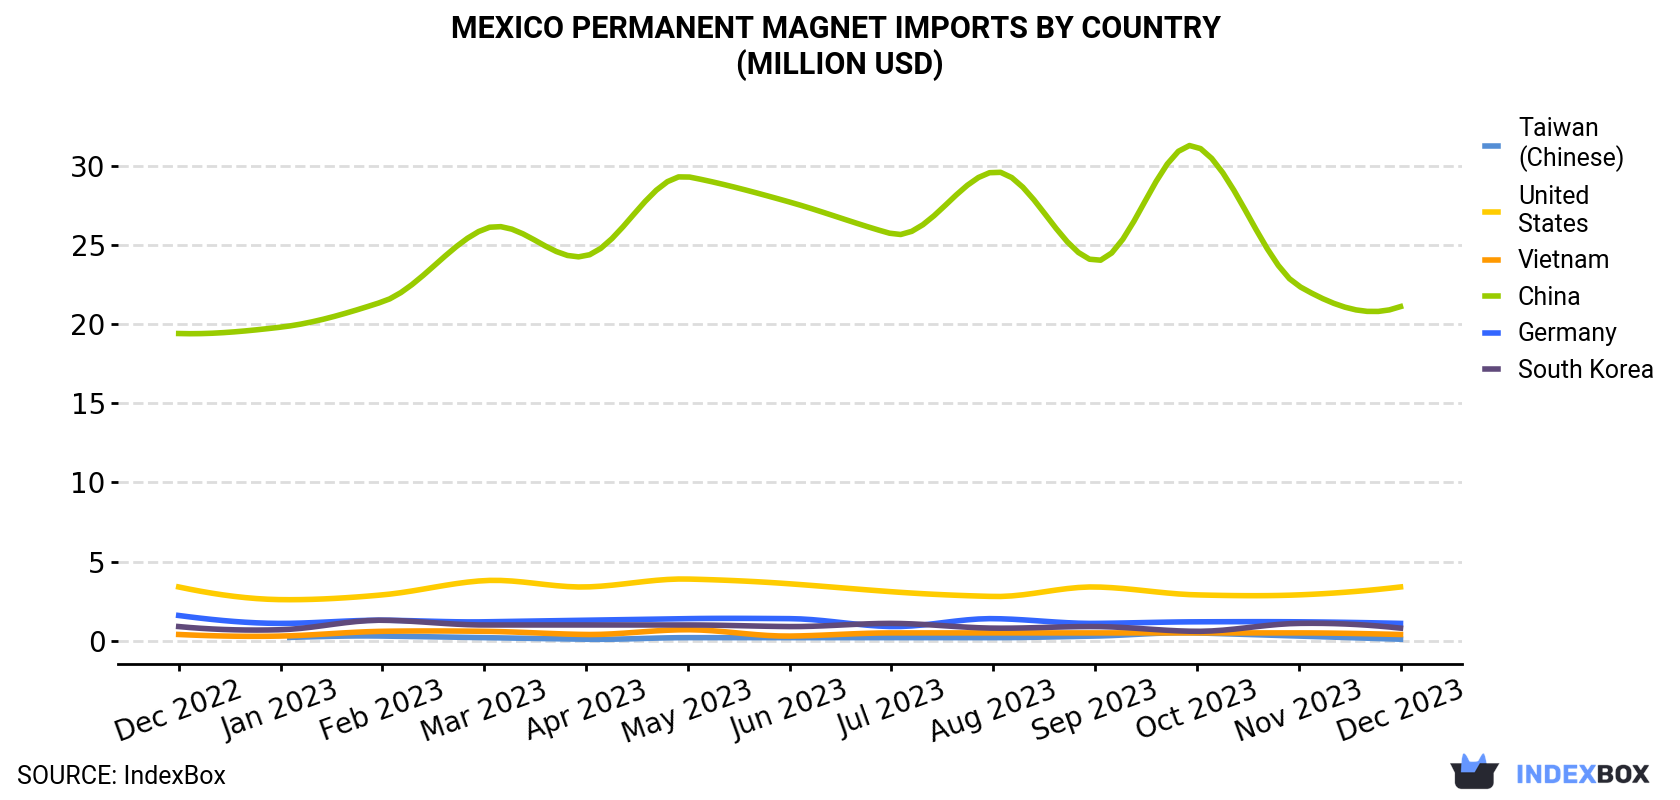 Mexico Permanent Magnet Imports By Country (Million USD)